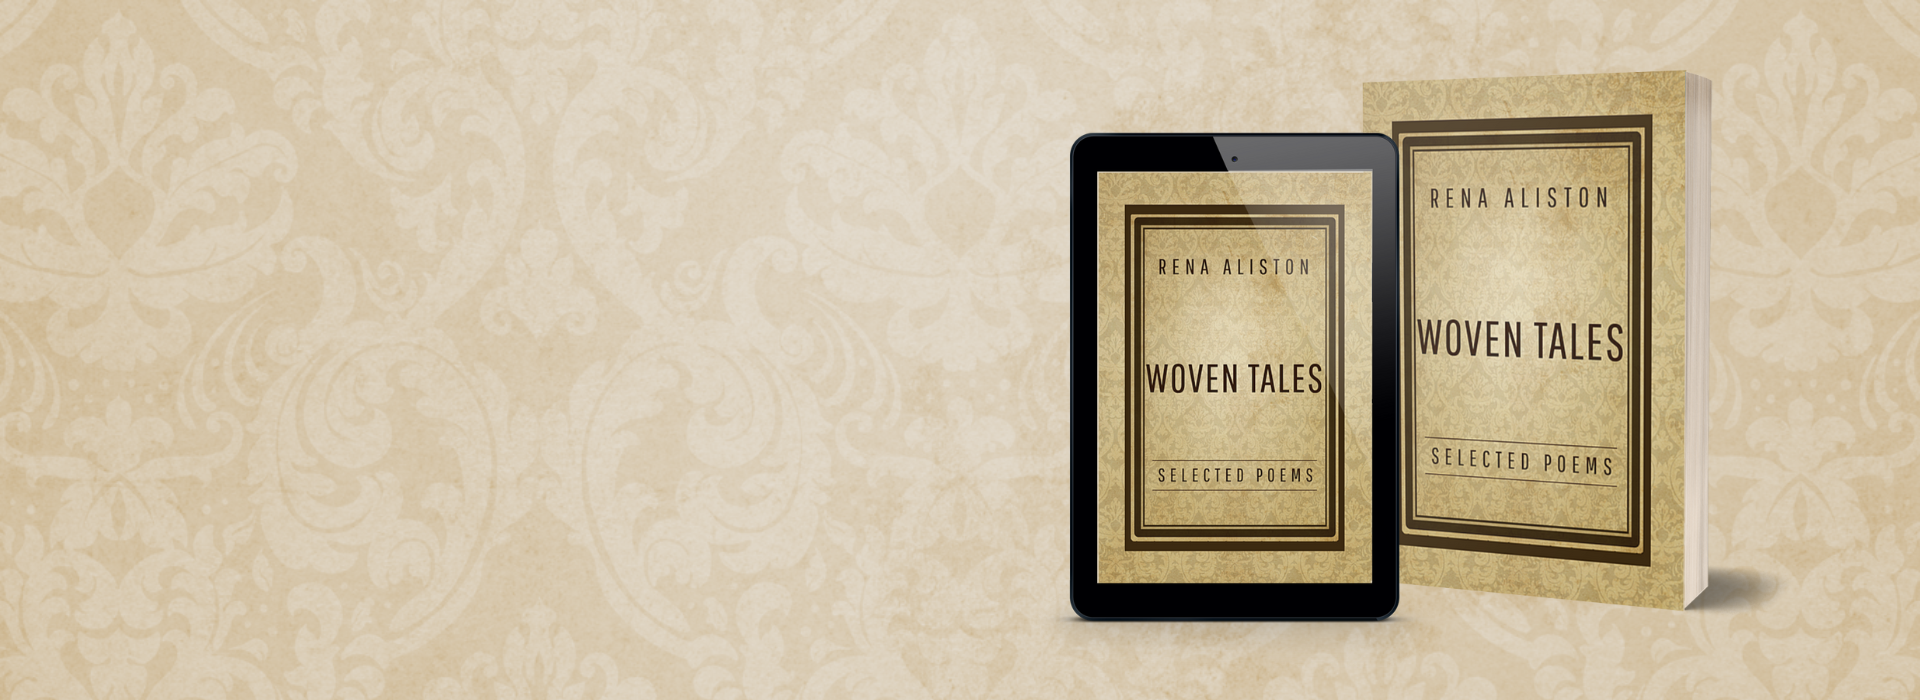 Woven Tales: Selected Poems by Rena Aliston Out Now